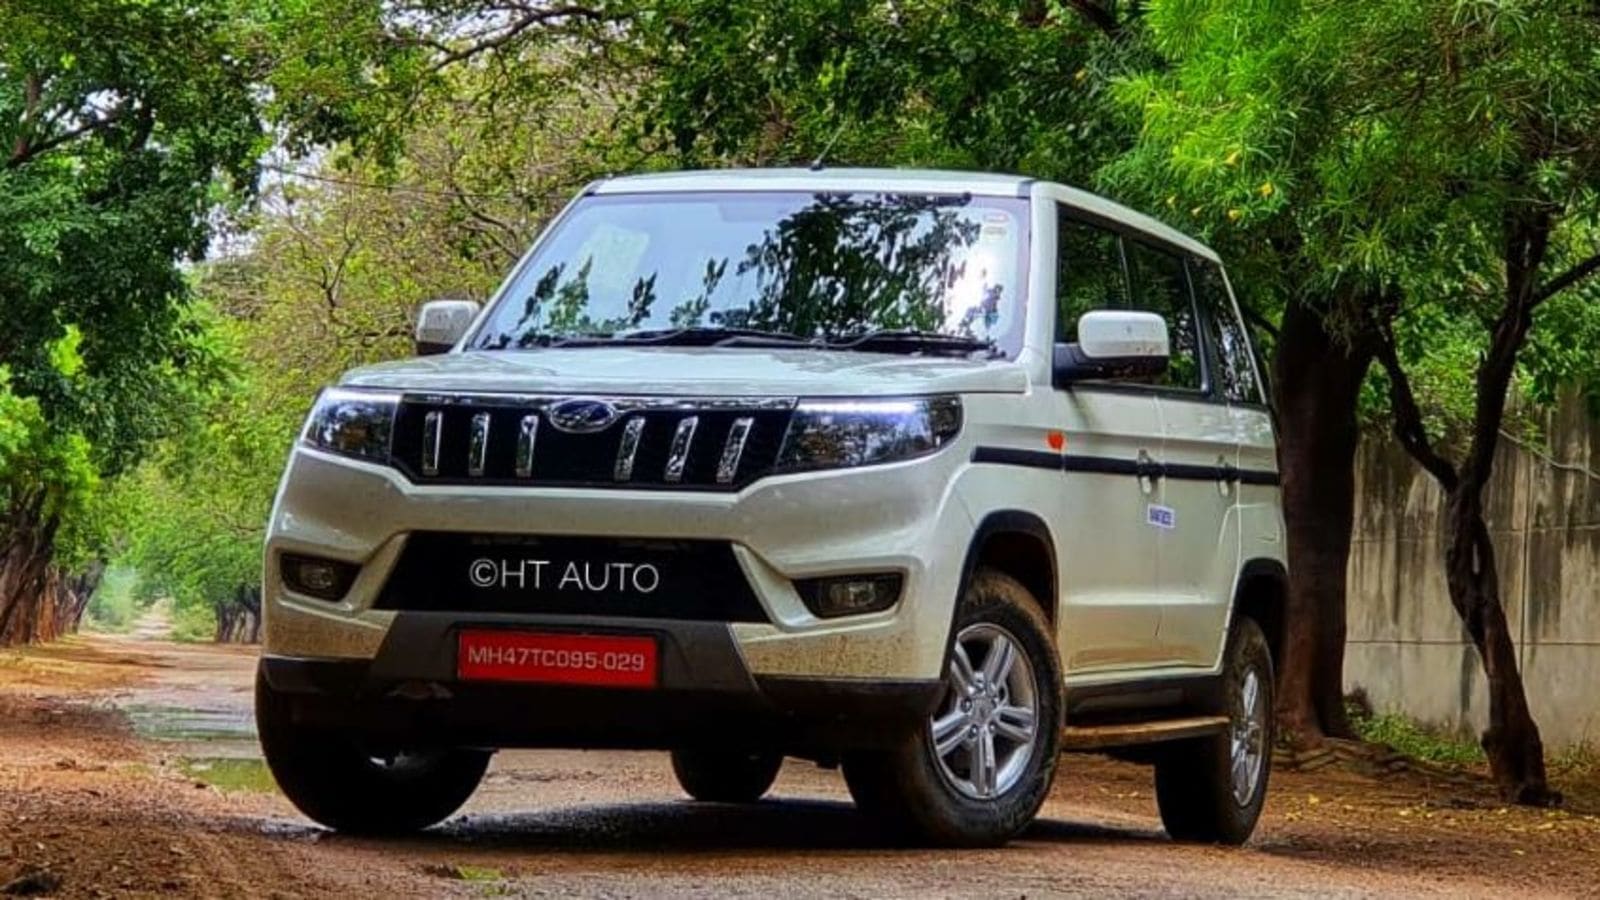 Mahindra Bolero Neo SUV launched Price, variants, dimensions, features